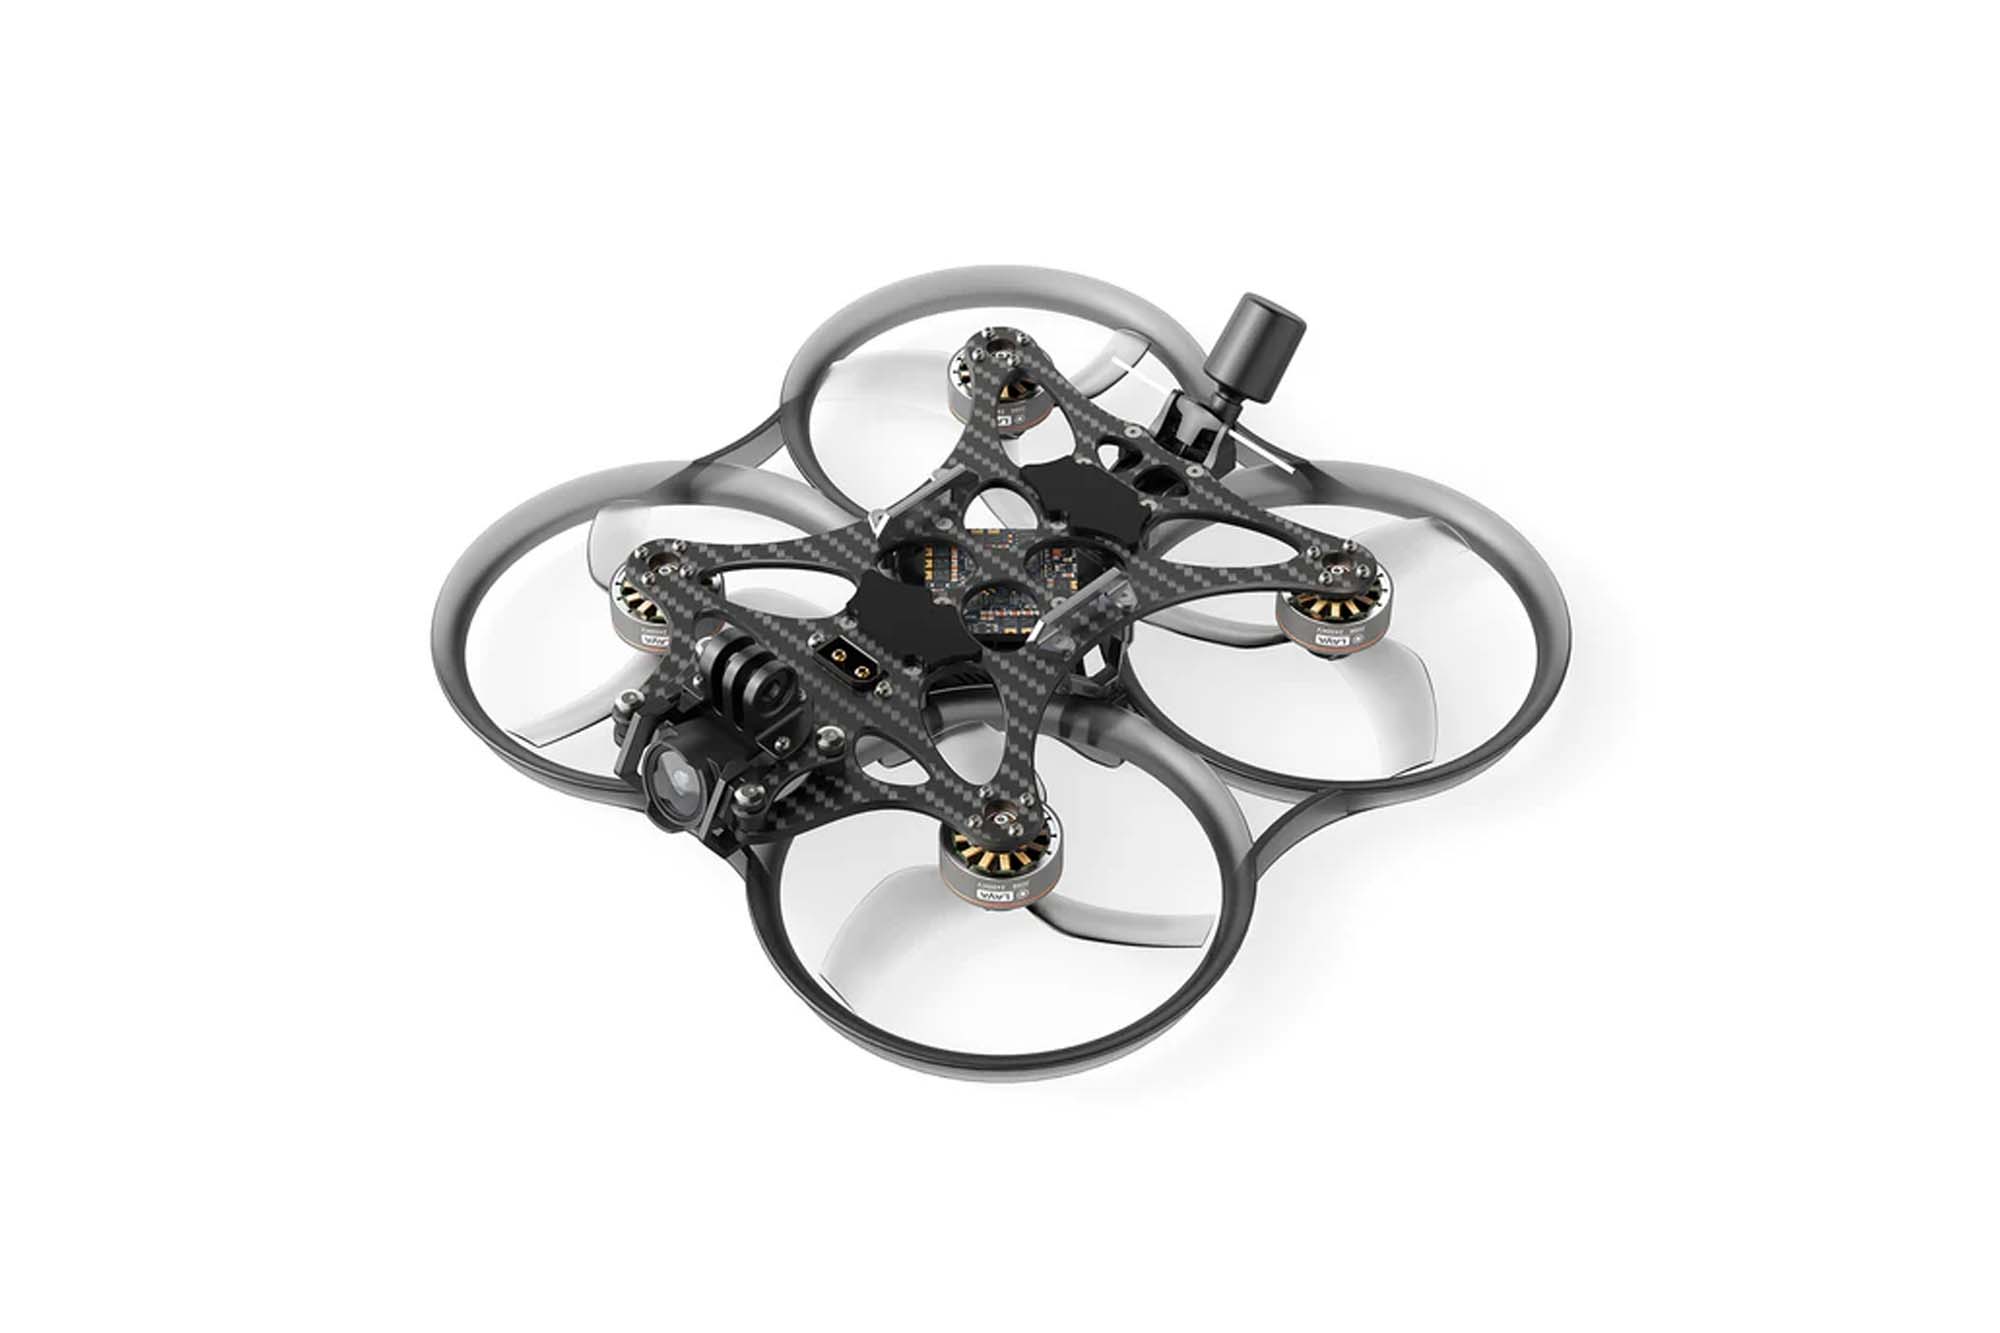 BetaFPV Pavo35 Brushless Whoop Quadcopter ELRS 2.4g HD Pro Kit -  BF-TOP